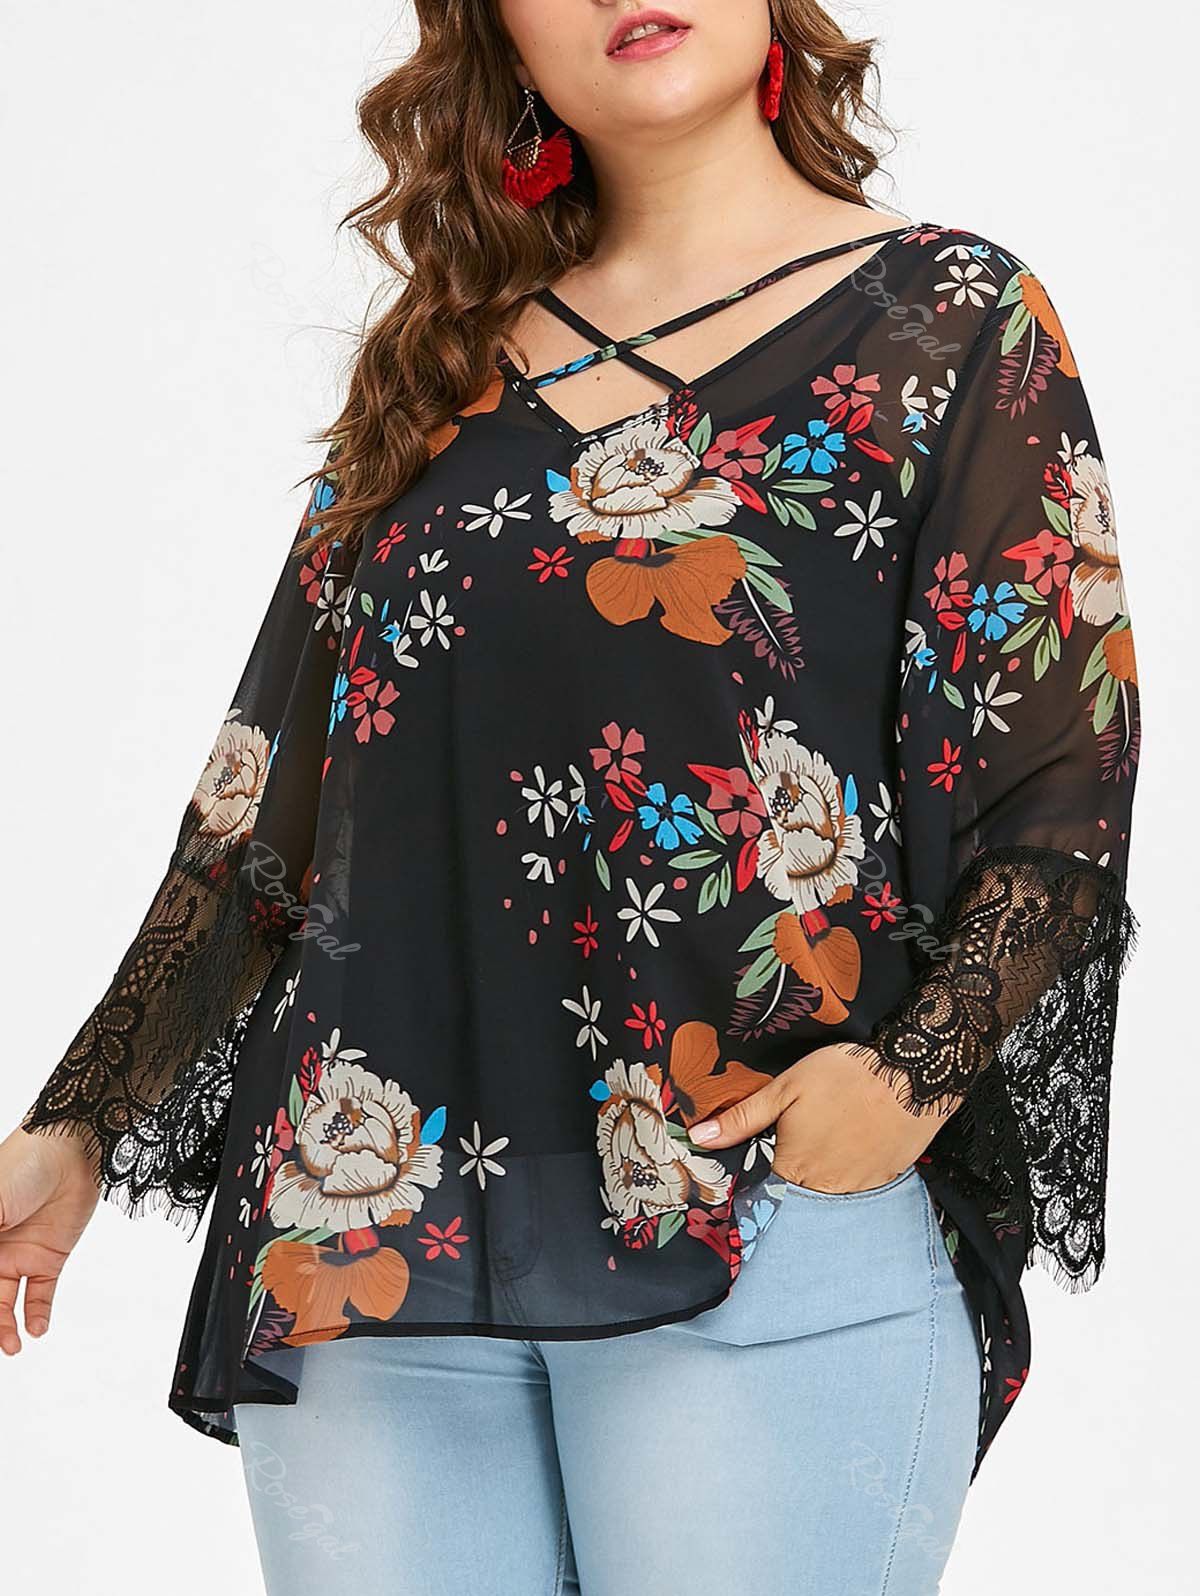 [58% OFF] Plus Size Floral Chiffon Blouse And Slip Top | Rosegal